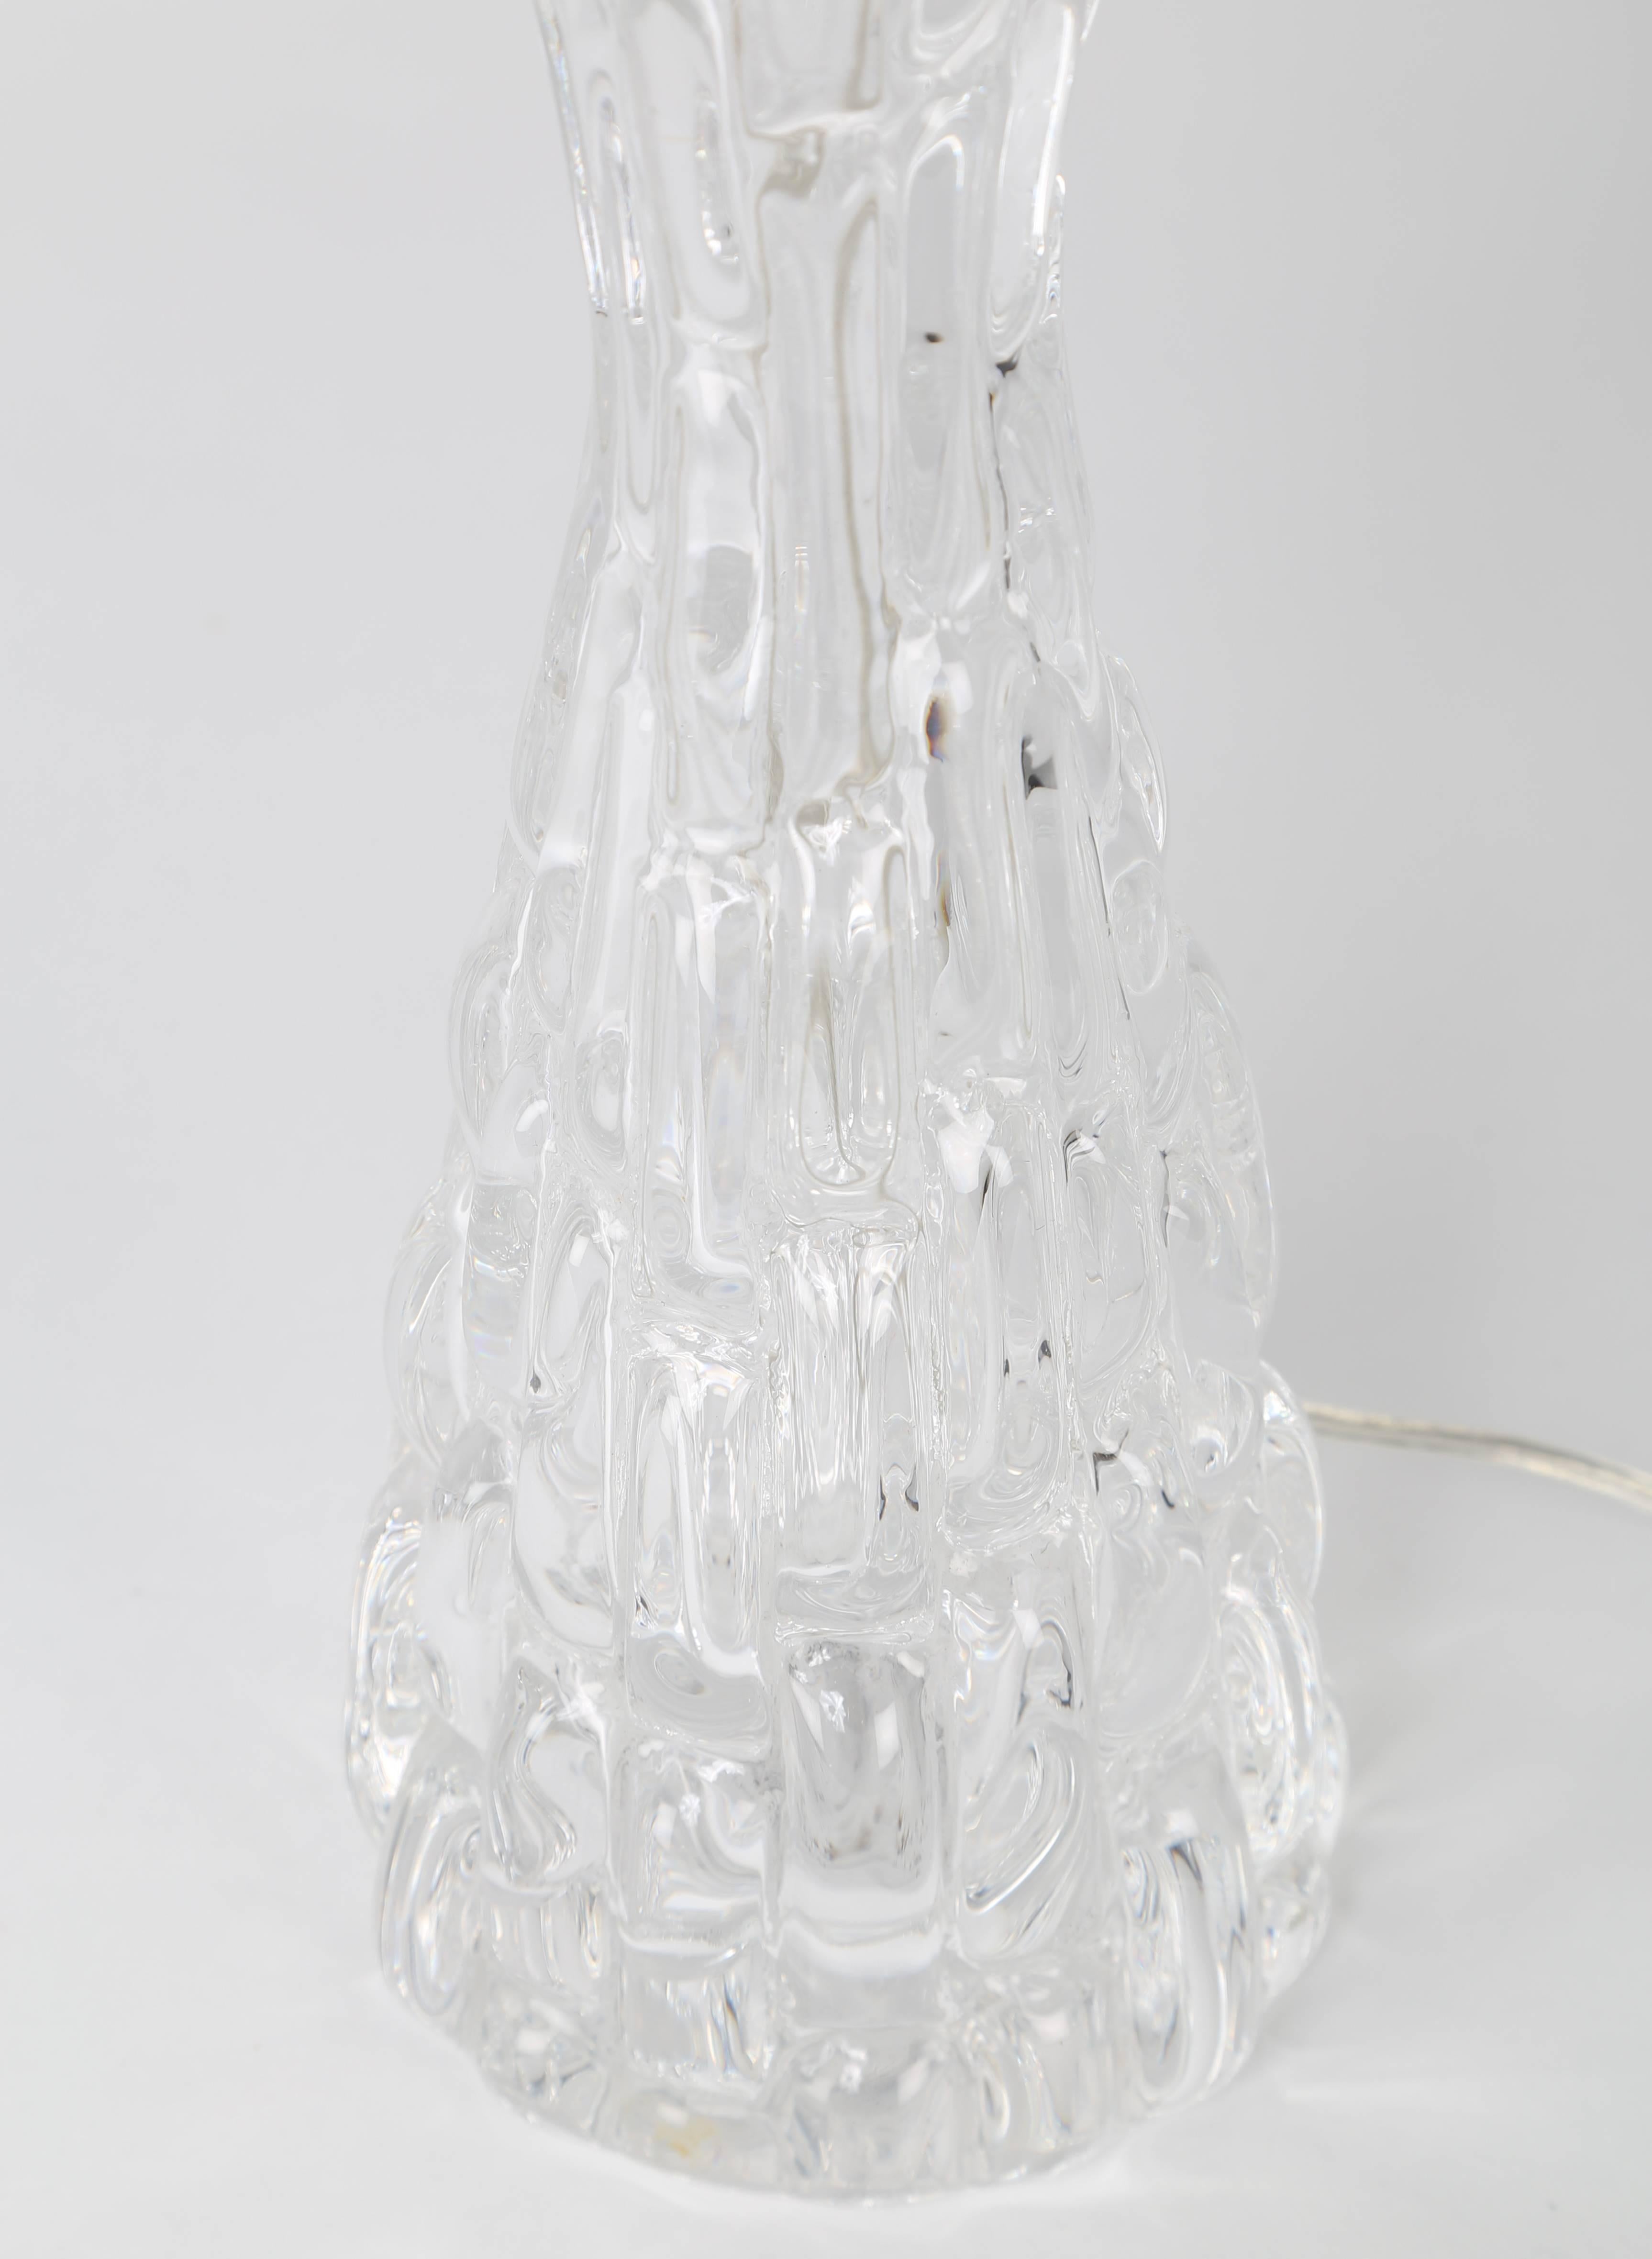 Polished Pair of 1970s Bubble-Textured Clear Glass Lamps by Carl Fagerlund for Orrefors